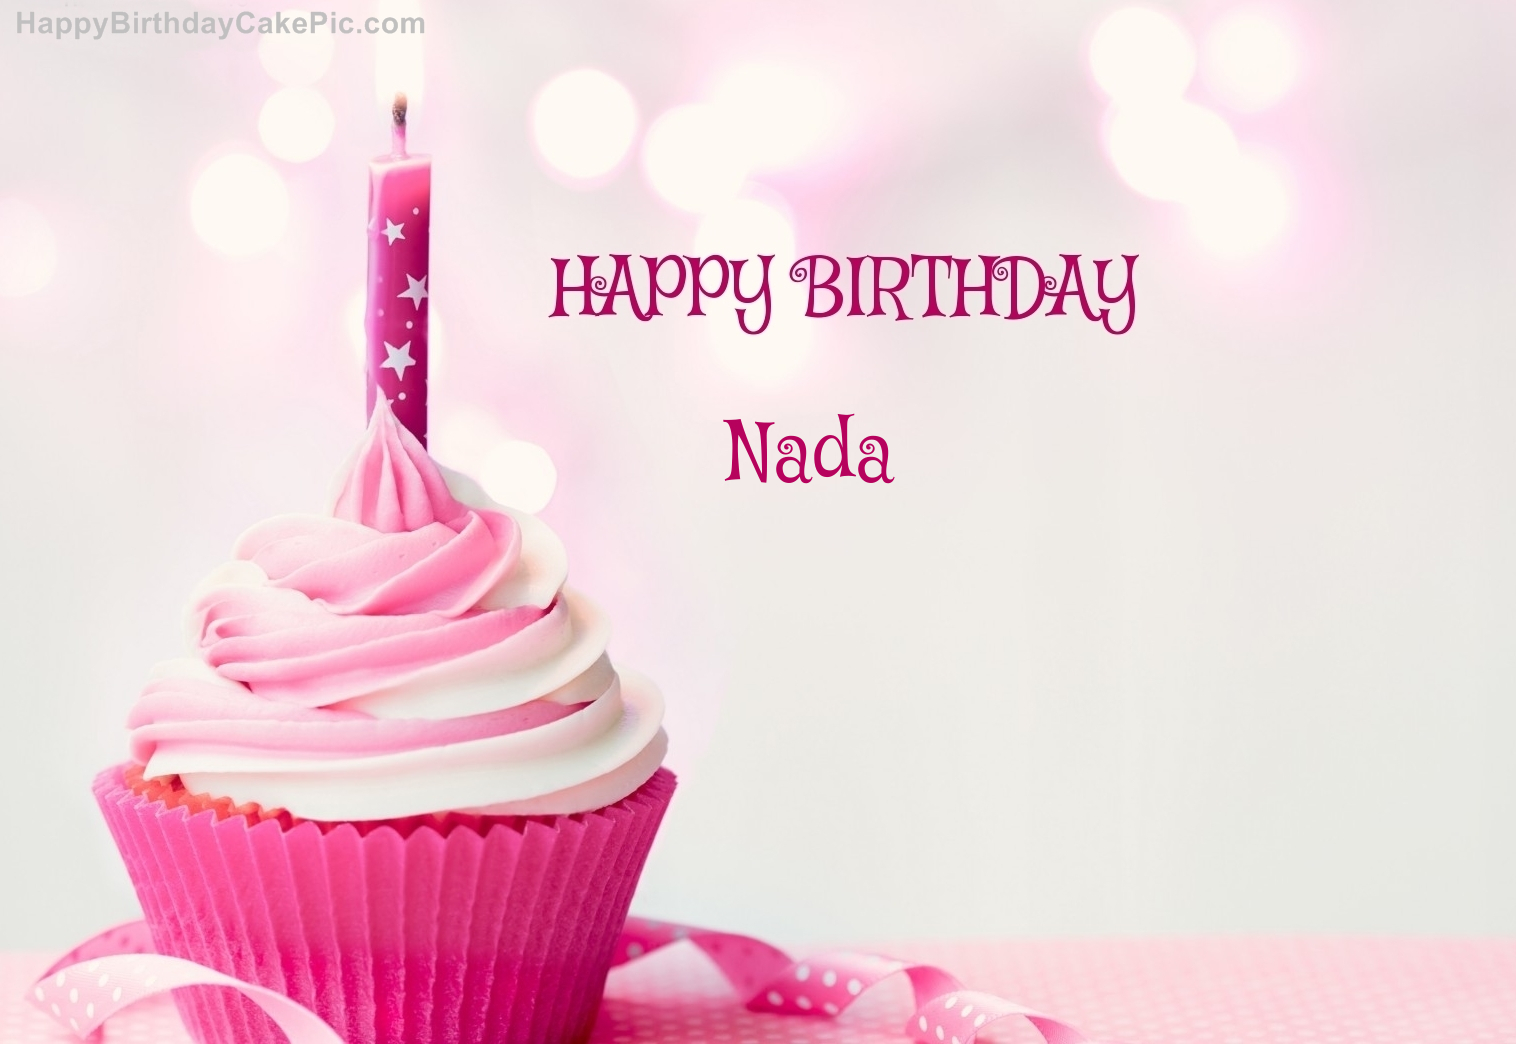 http://happybirthdaycakepic.com/pic-preview/Nada/7/happy-birthday-cupcake-candle-pink-picture-for-Nada